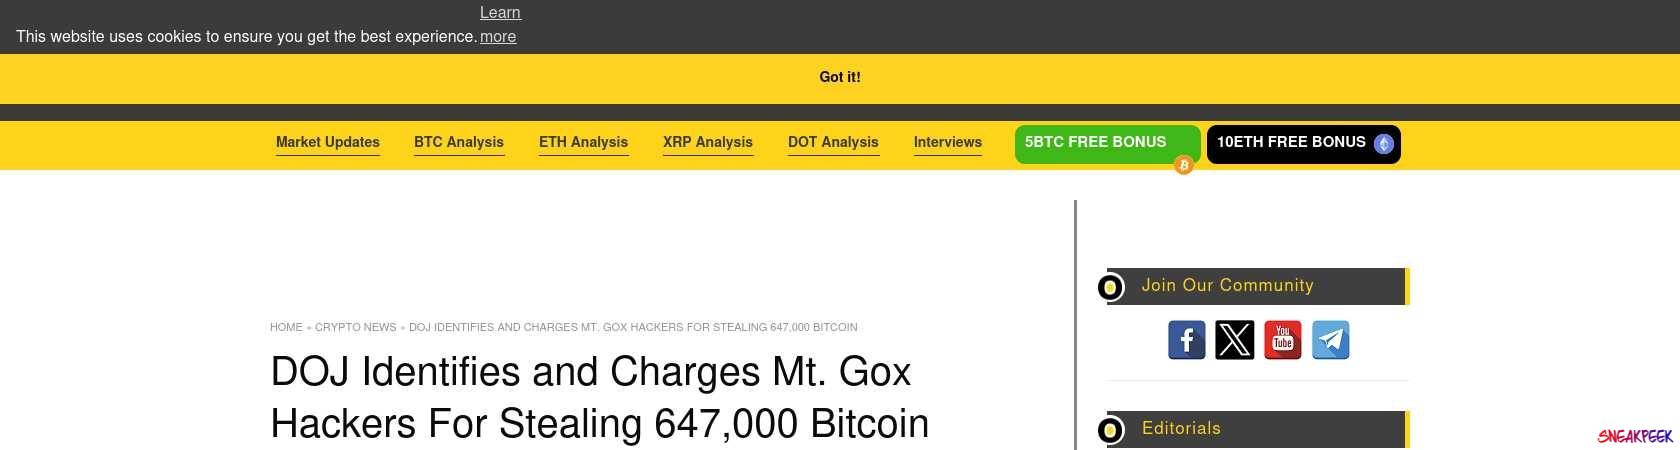 Read the full Article:  ⭲ DOJ Identifies and Charges Mt. Gox Hackers For Stealing 647,000 Bitcoin